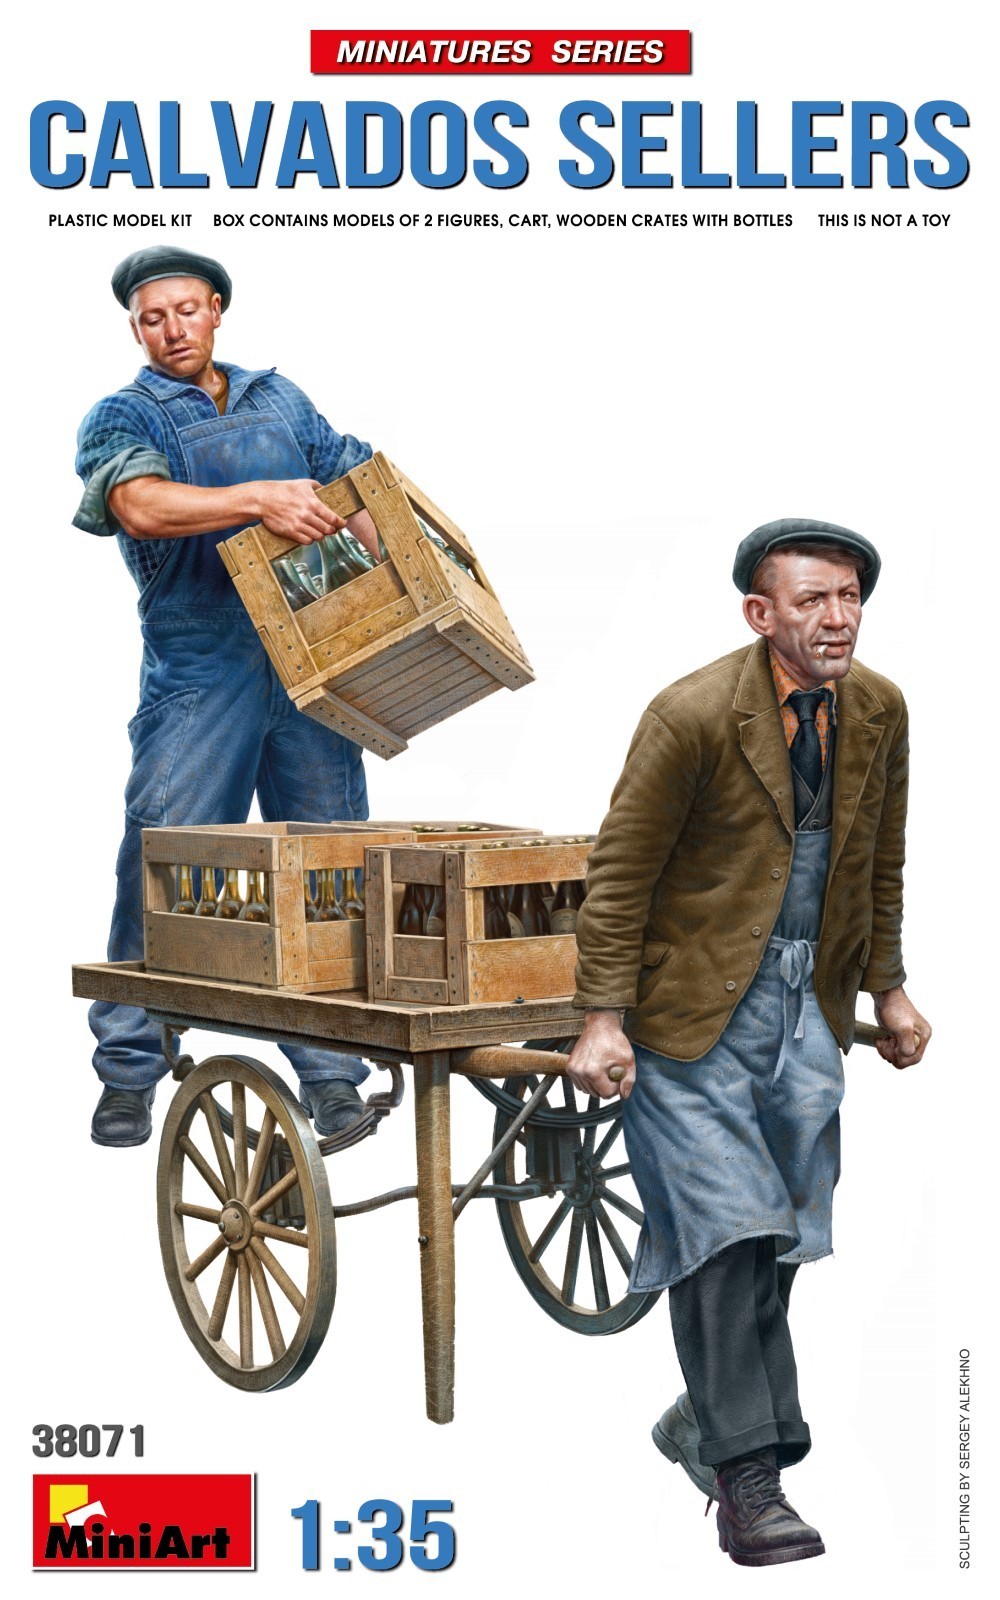 MiniArt to Release 1/35 Scale Calvados Sellers Kit with Clear Parts Box Art